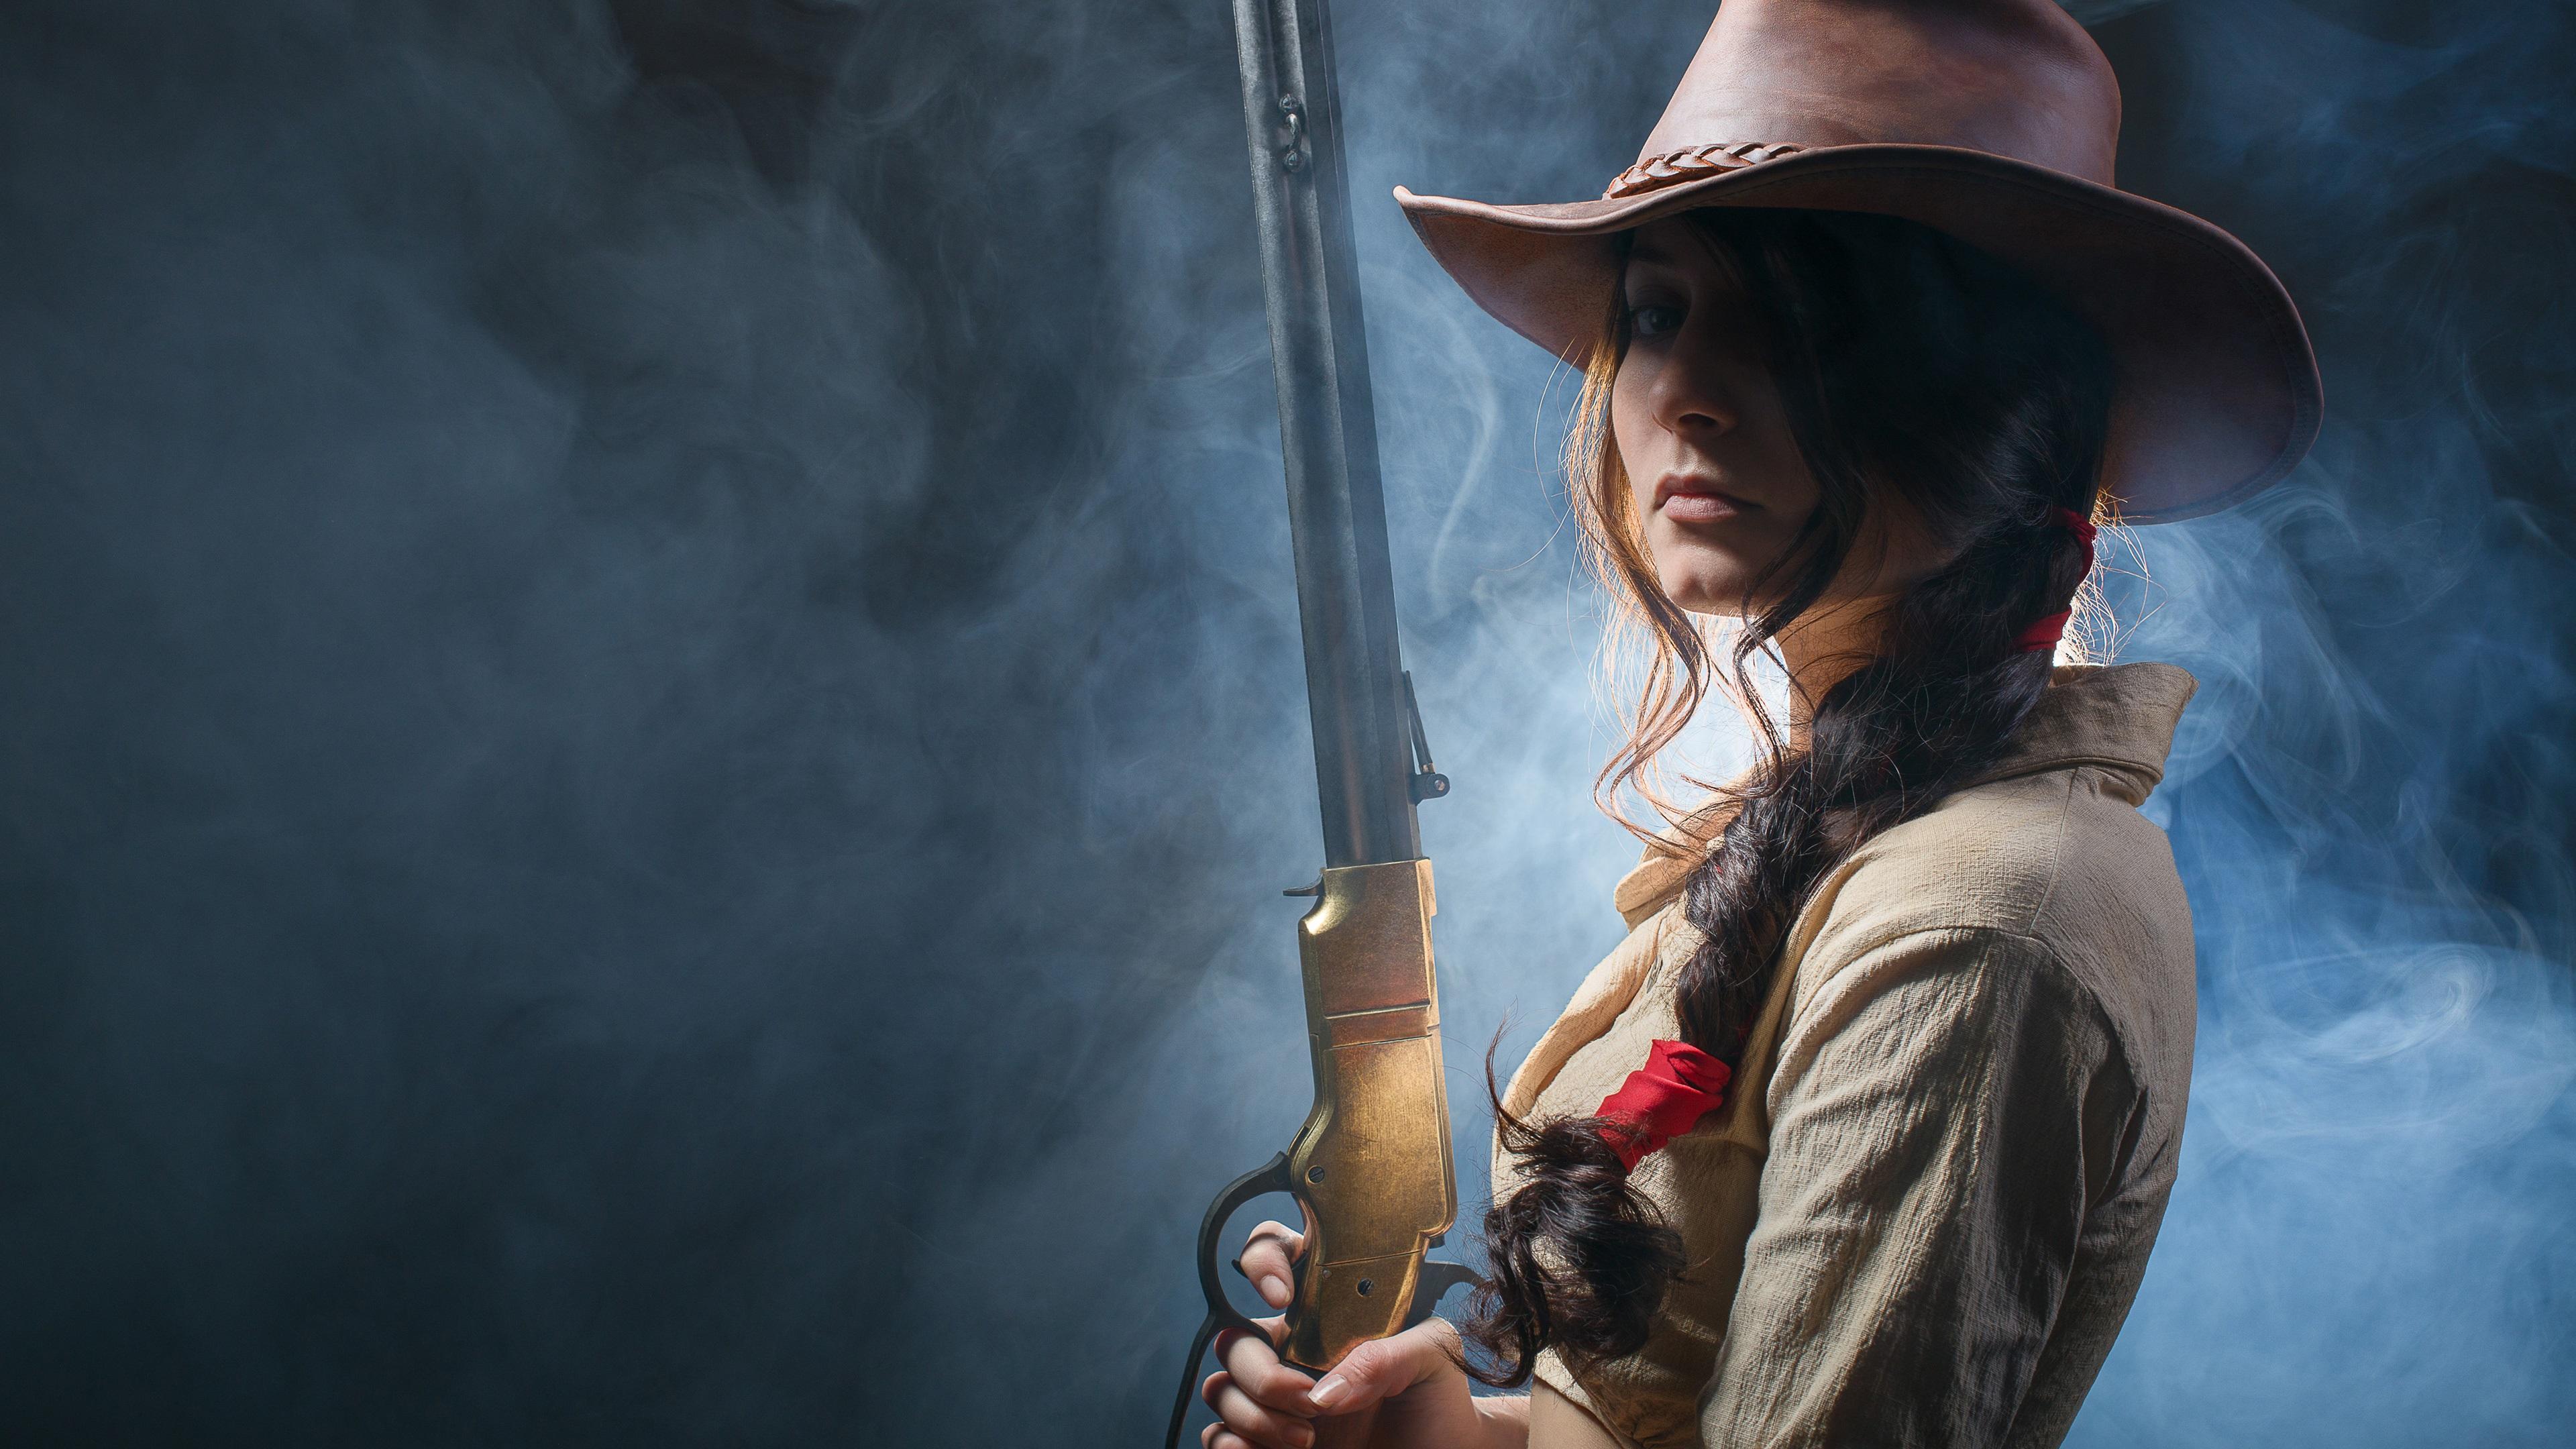 Wallpaper Wild west girl, rifle in hands, cowboy hat 3840x2160 UHD 4K Picture, Image